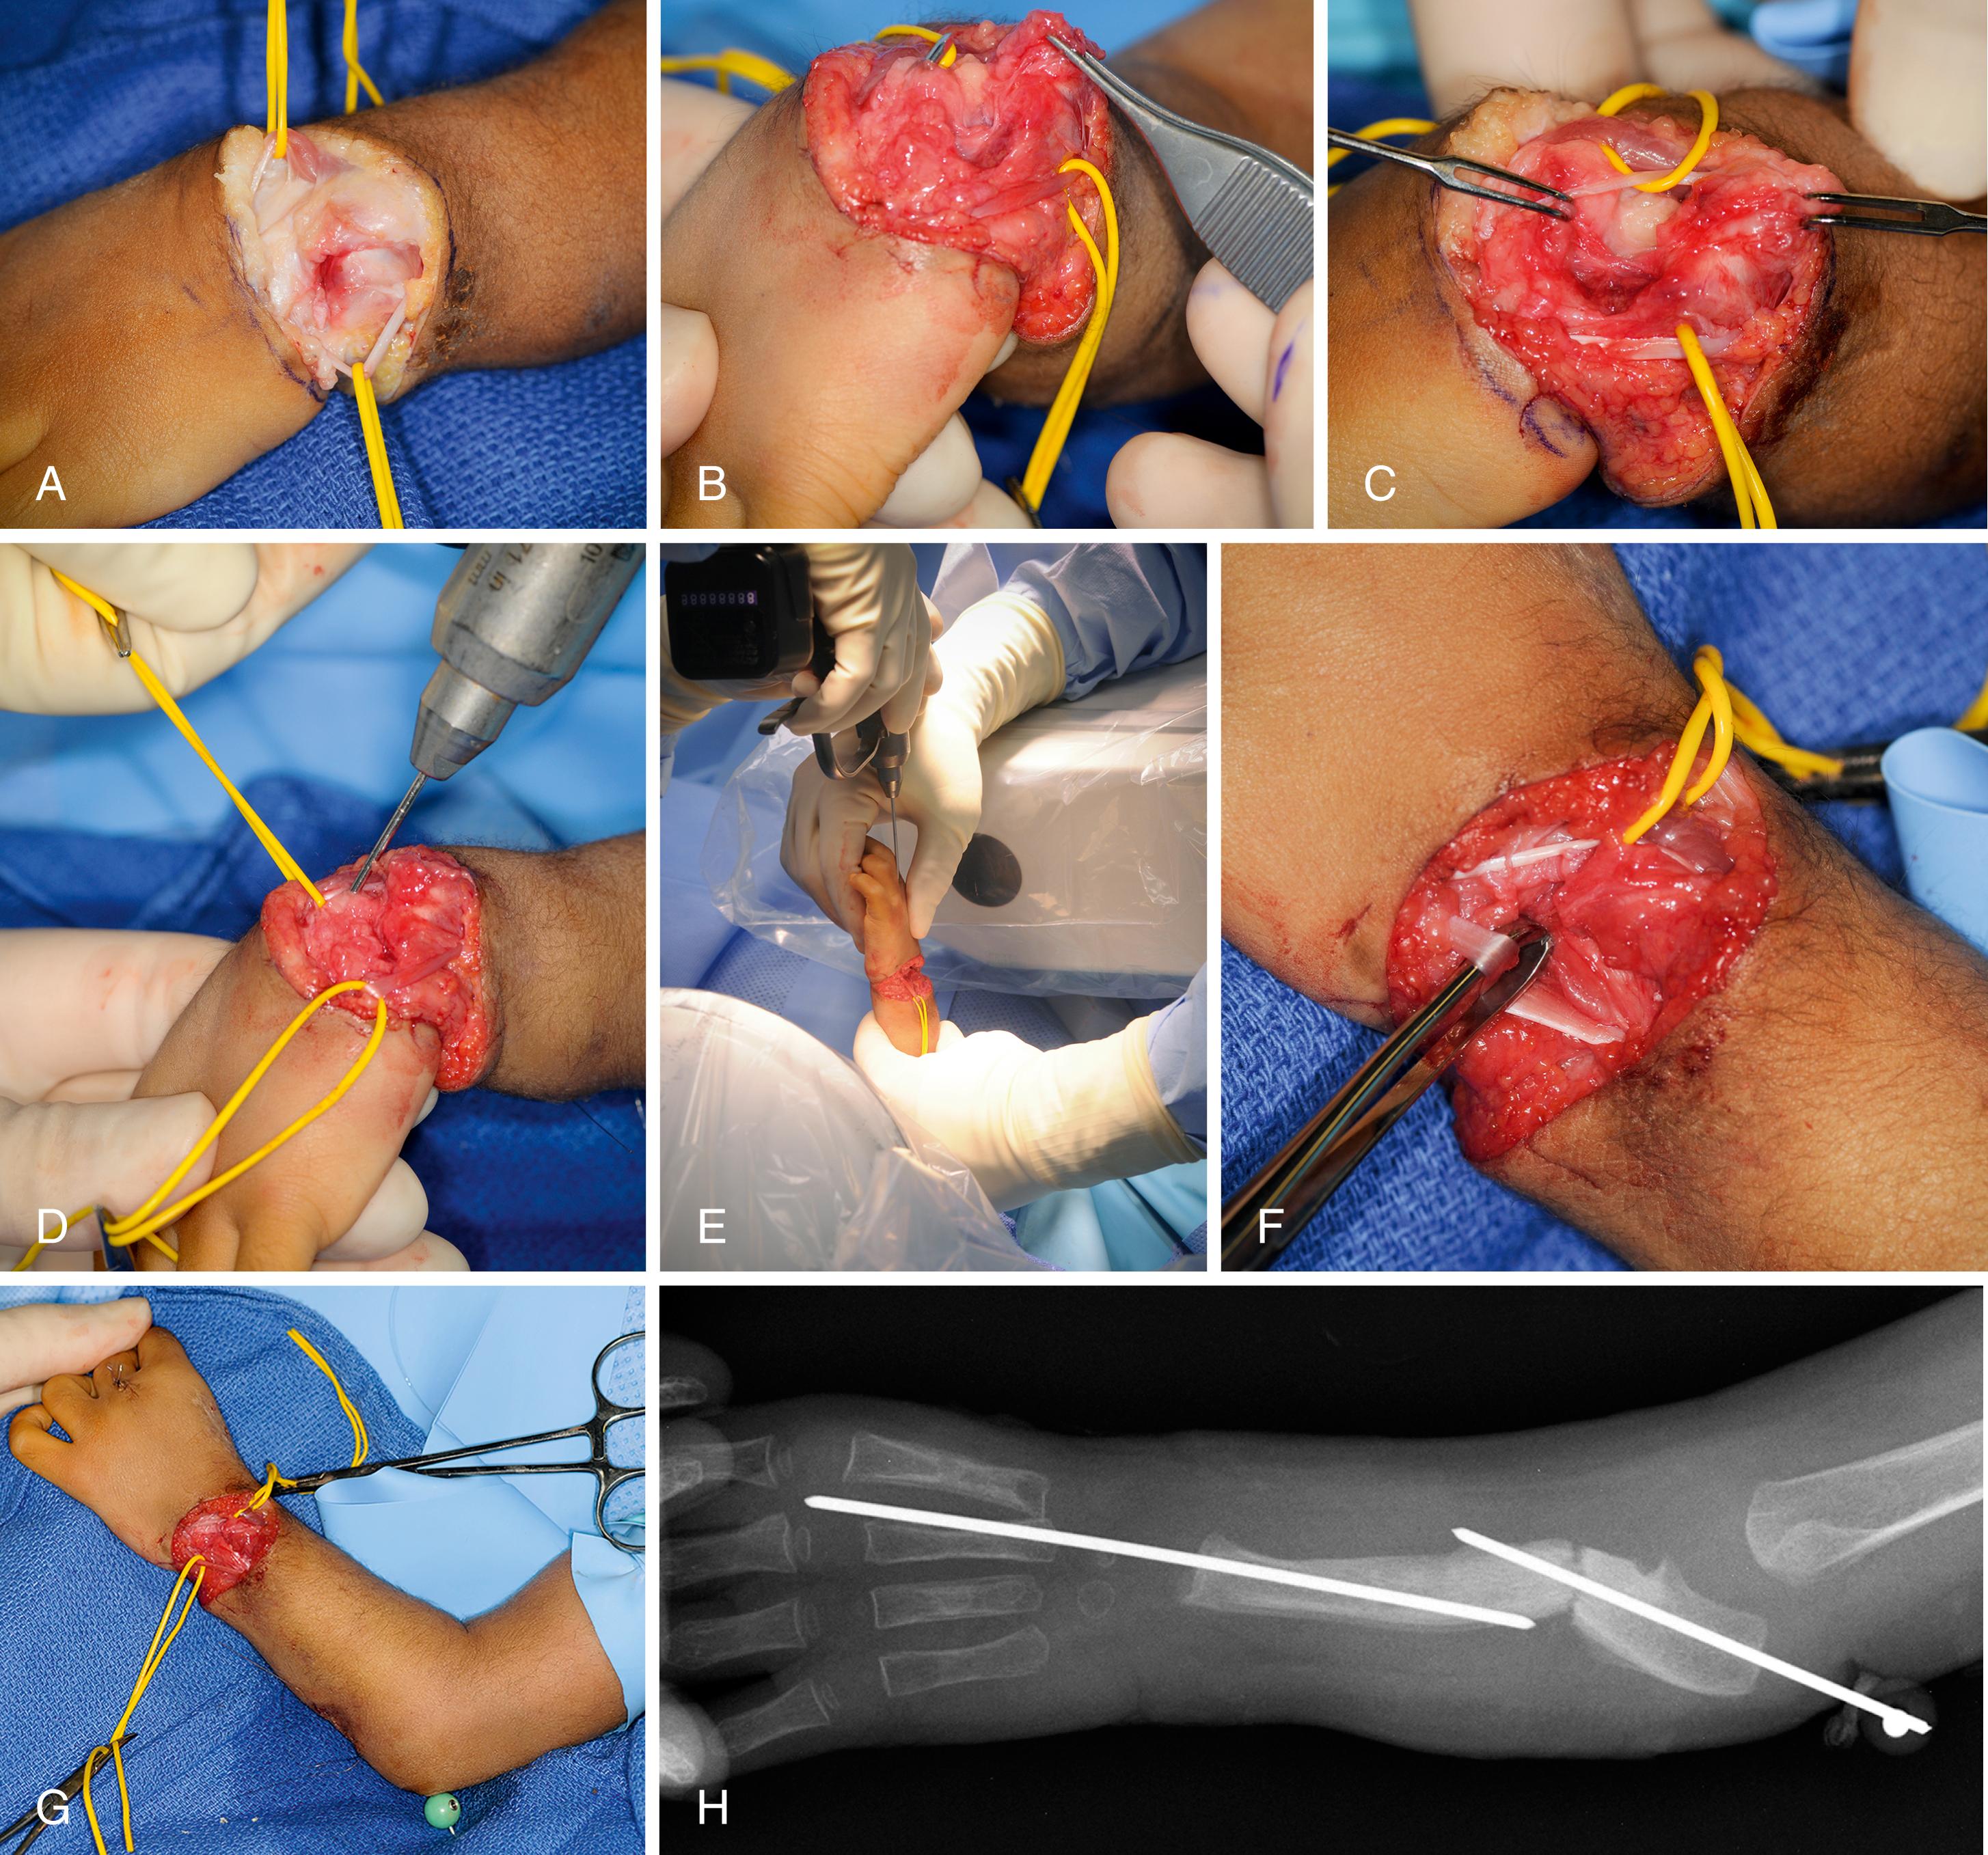 Fig. 38.6, A 1½-year-old male with isolated left type 4 radial deficiency and absent thumb treated with preliminary distraction and centralization. A, Following fixator removal, an elliptical dermodesis incision is made and the underlying tendons are identified. B, Ulnocarpal capsulotomy. C, Ulnar head isolated. D, Antegrade 0.062-inch Kirschner wire. E, Kirschner wire passed retrograde across ulnocarpal joint. F, Extensor carpi ulnaris imbrication. G, Concomitant ulnar osteotomy and overall alignment. H, Postoperative x-ray with Kirschner wires across ulnocarpal joint and ulnar osteotomy.